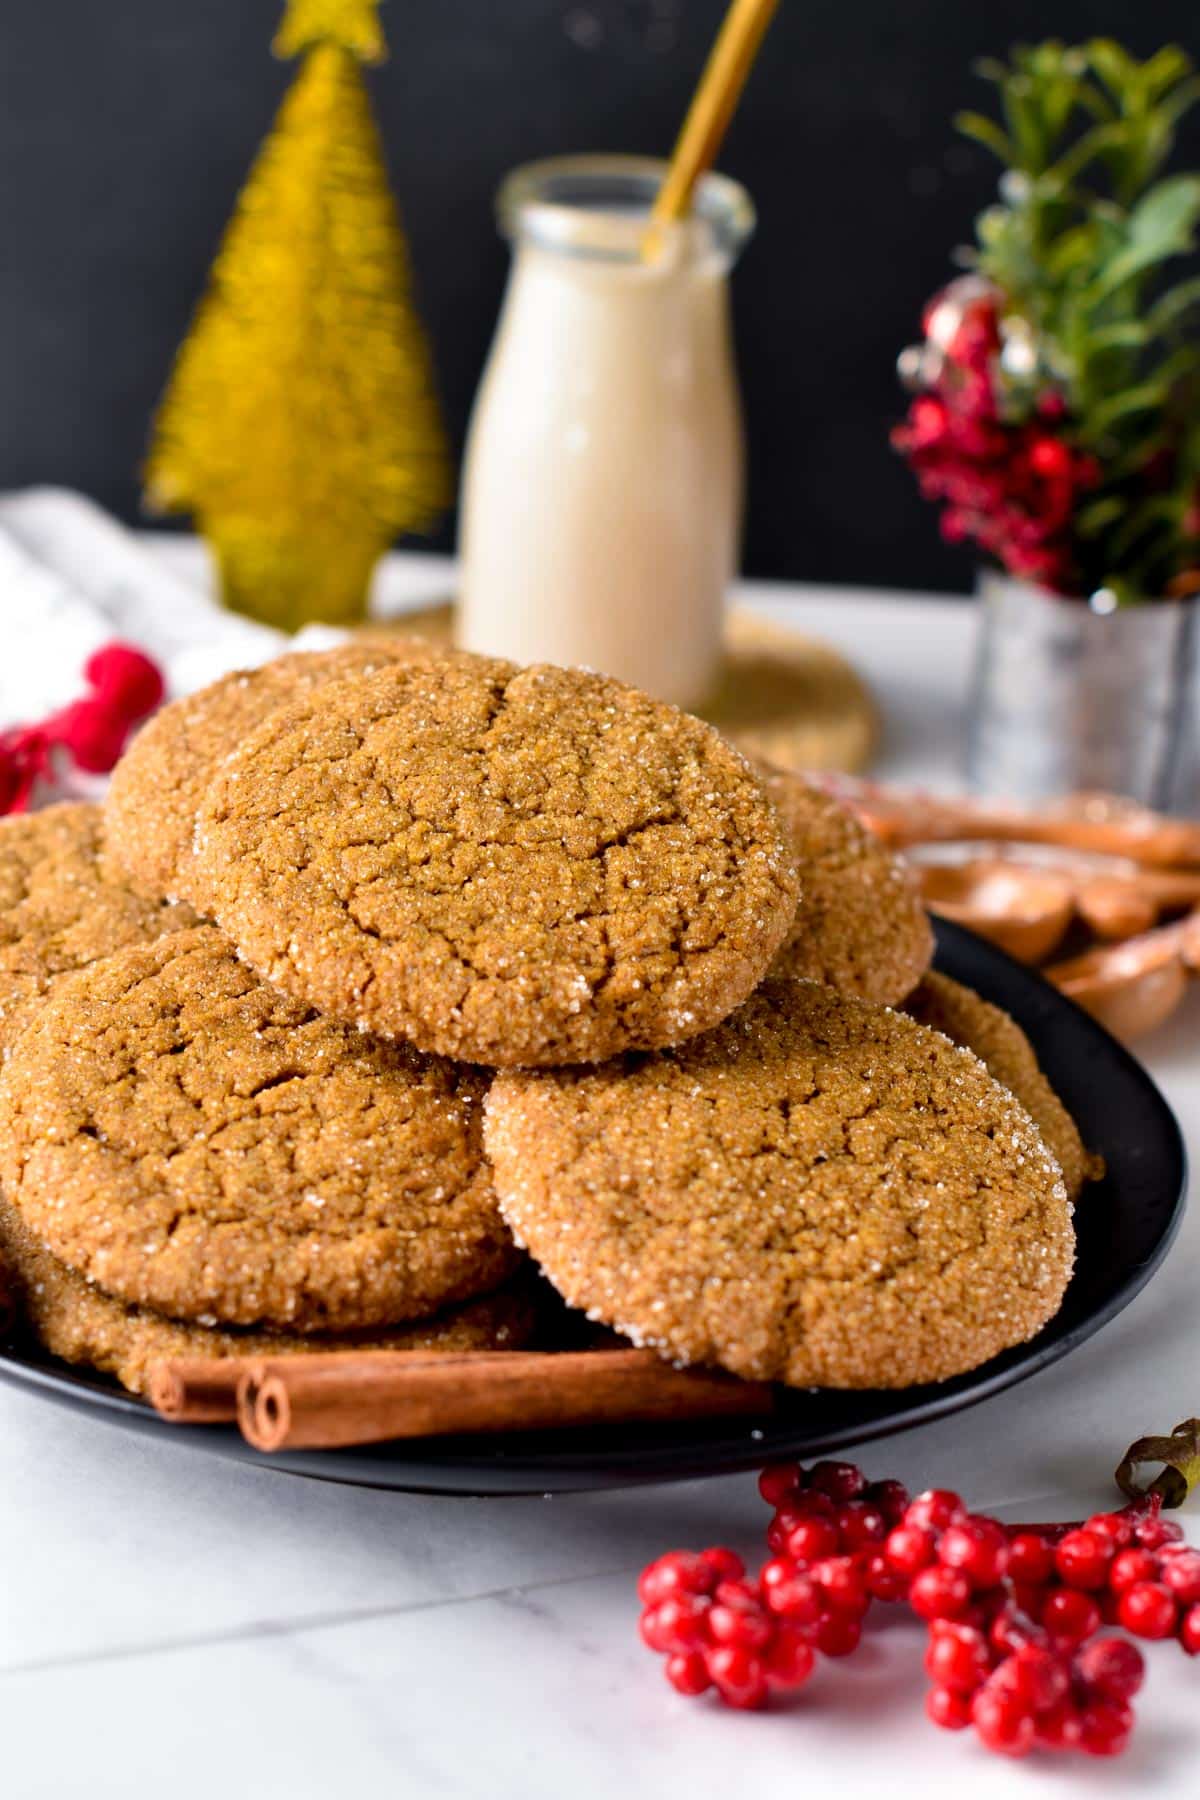 A stack of Vegan Gingersnap Cookies on a black plate with Christmas decor.